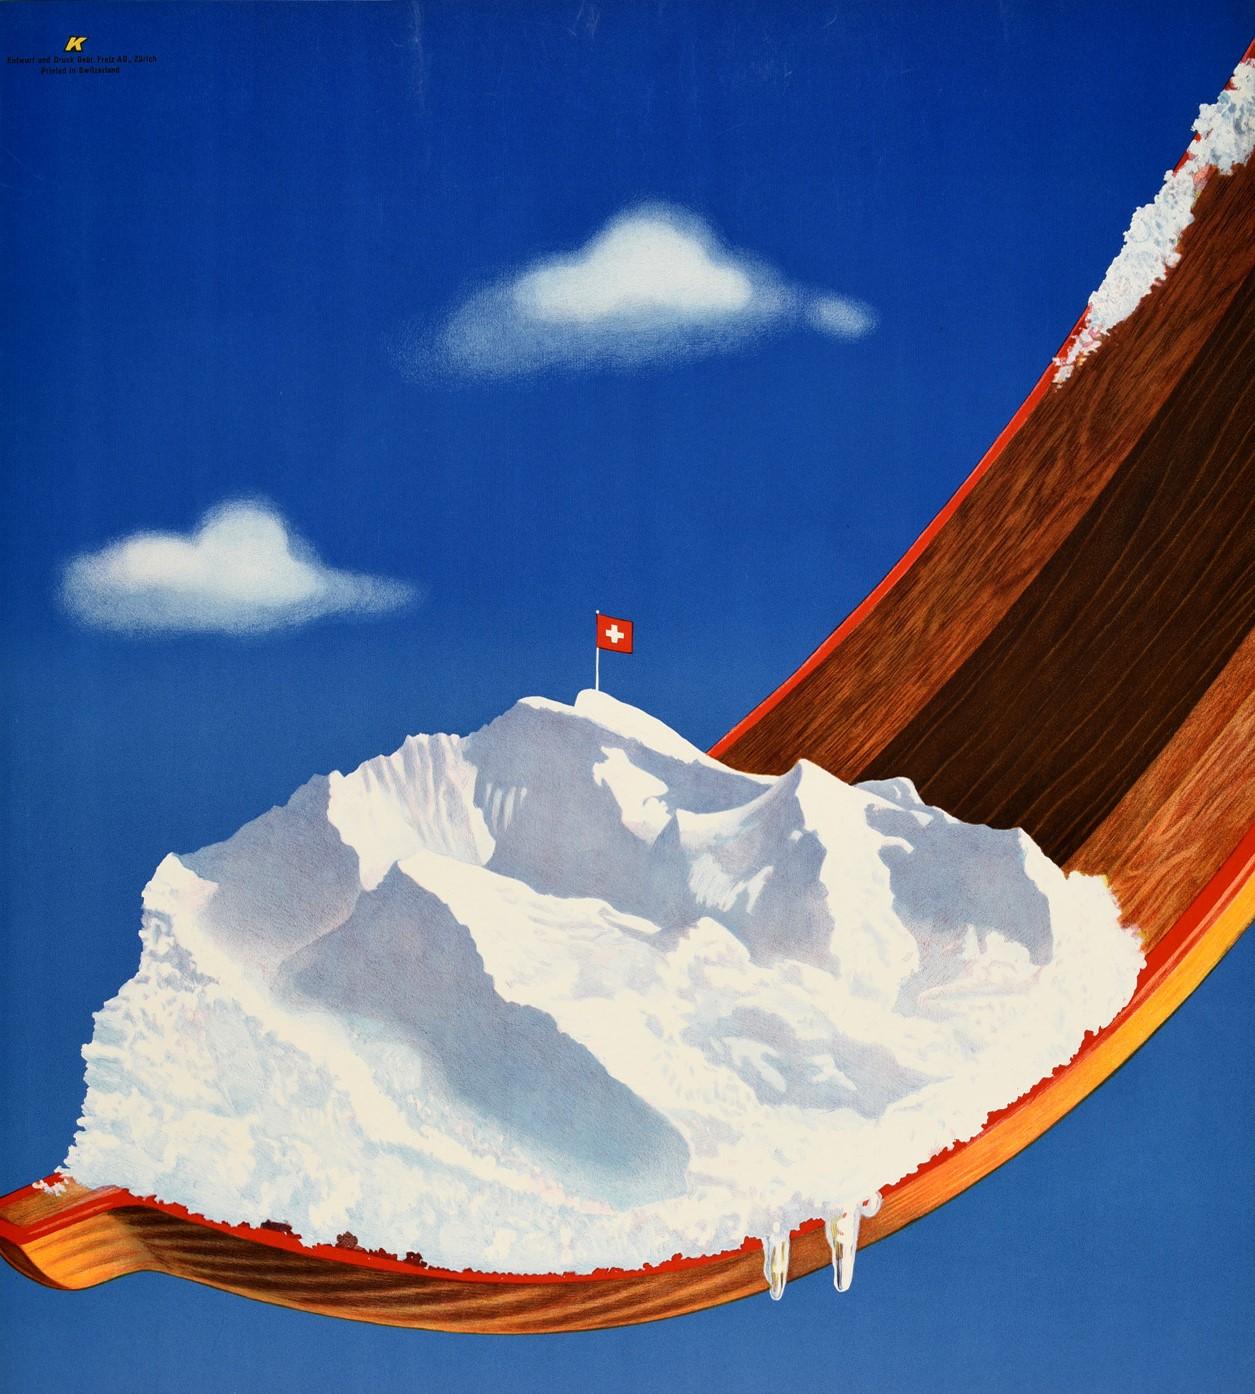 Original vintage ski and winter sport travel poster for the popular ski resort of Wengen, a village located in the Bernese Oberland region of Switzerland, featuring a colorful image of the snow white alpine mountains being served to the viewer on